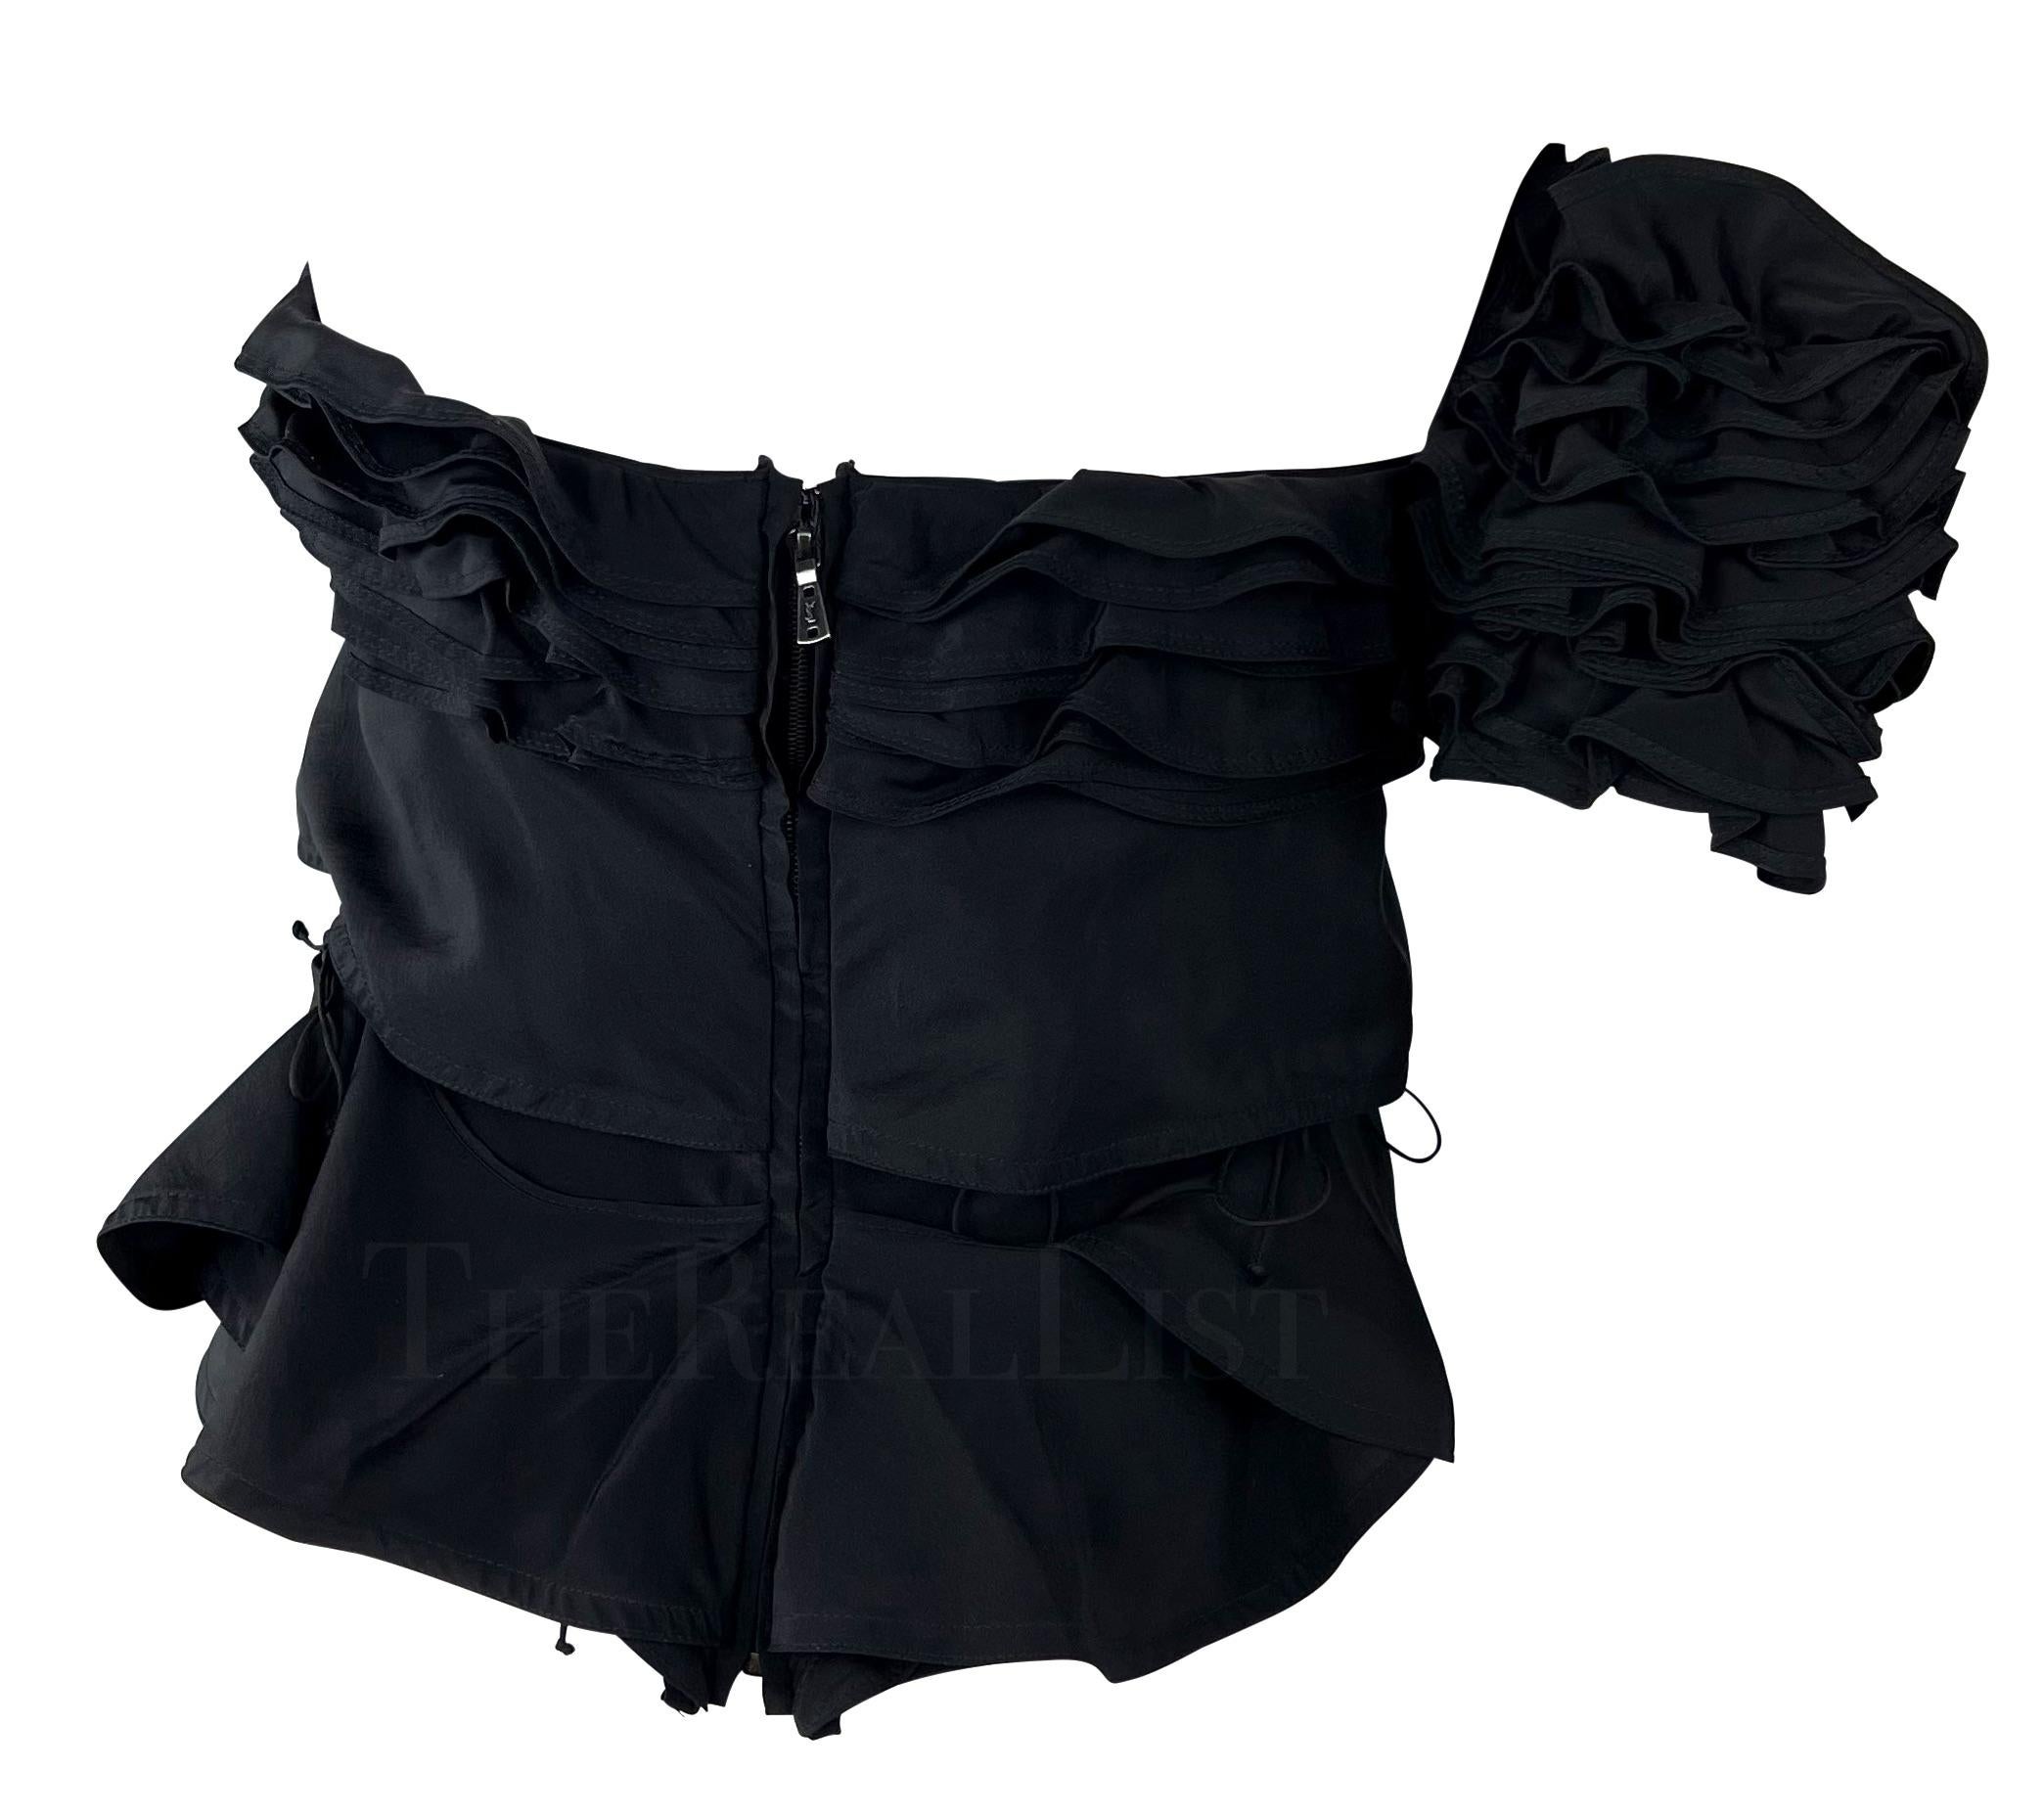 NWT F/W 2003 Yves Saint Laurent by Tom Ford Black Silk Ruffle Strapless Top For Sale 2